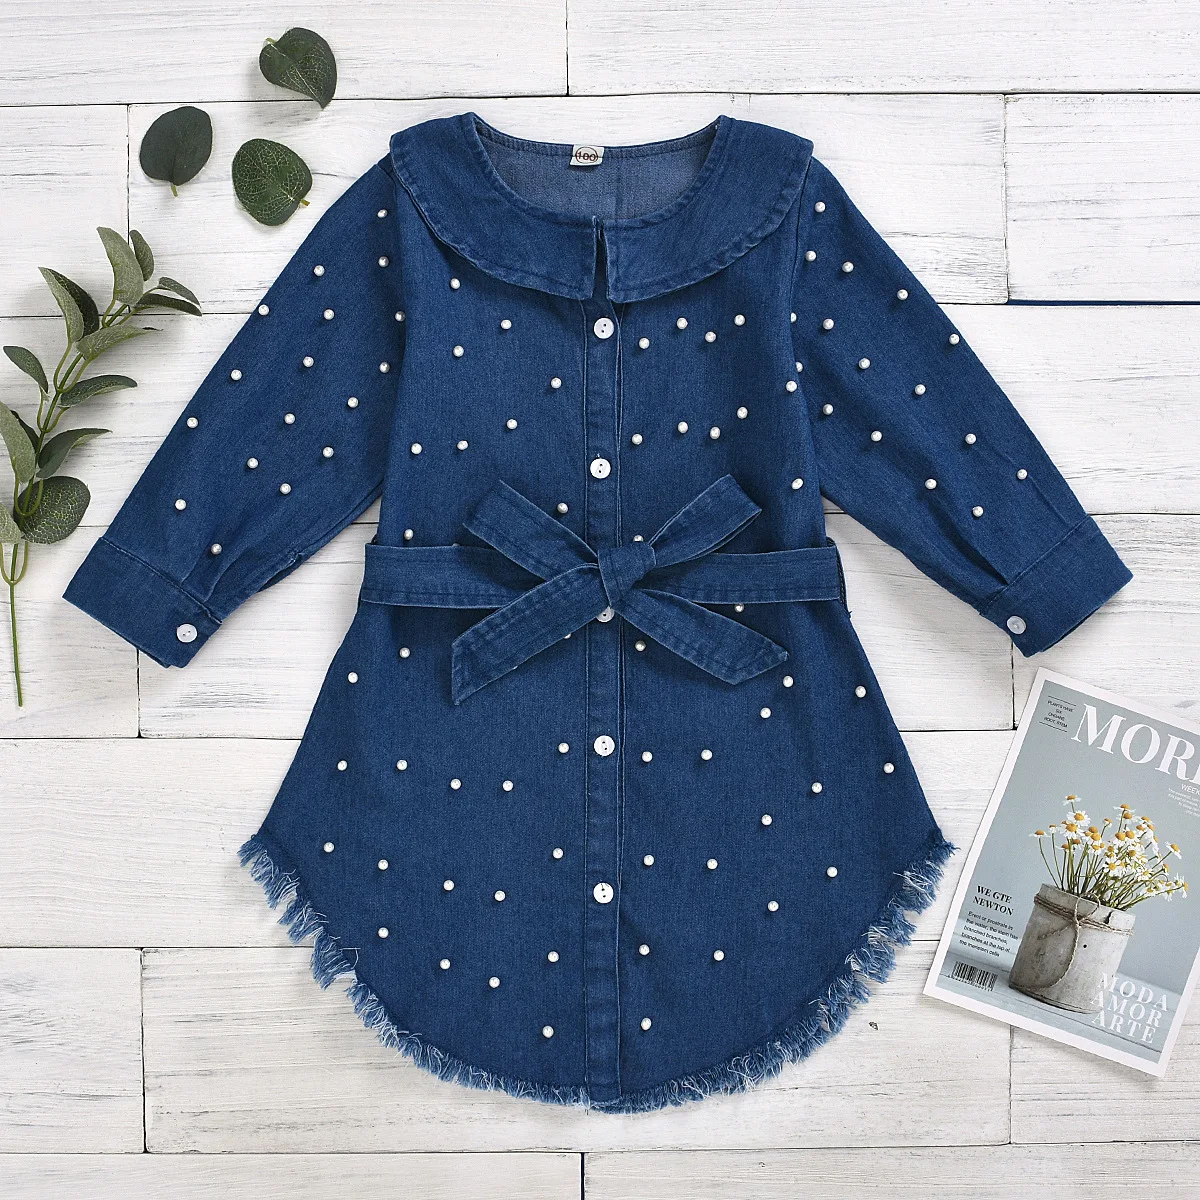 Autumn Fashion Girl Long sleeve Dress Kids Fall Clothes Children Party Clothing